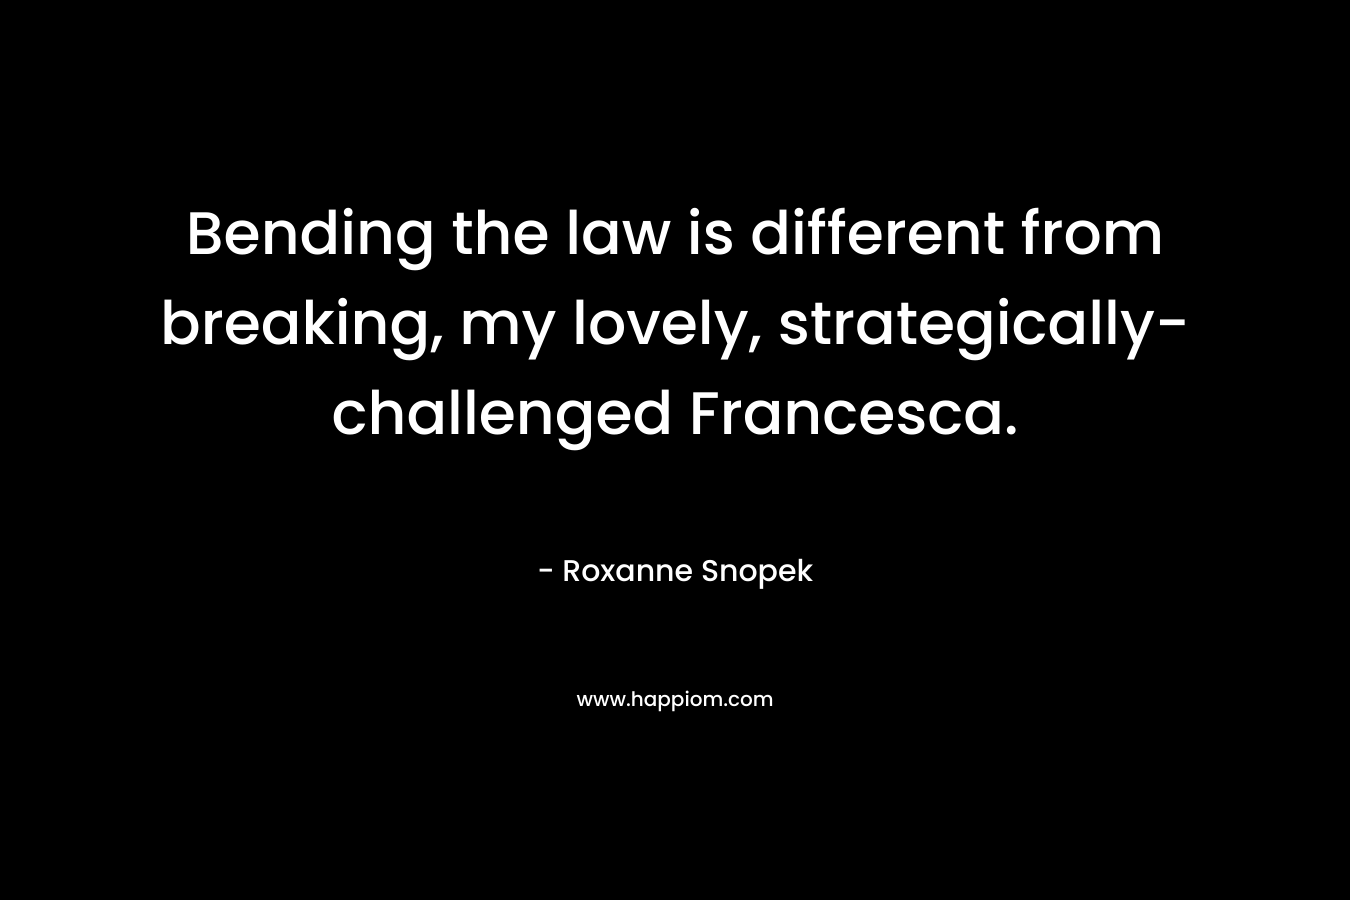 Bending the law is different from breaking, my lovely, strategically-challenged Francesca.